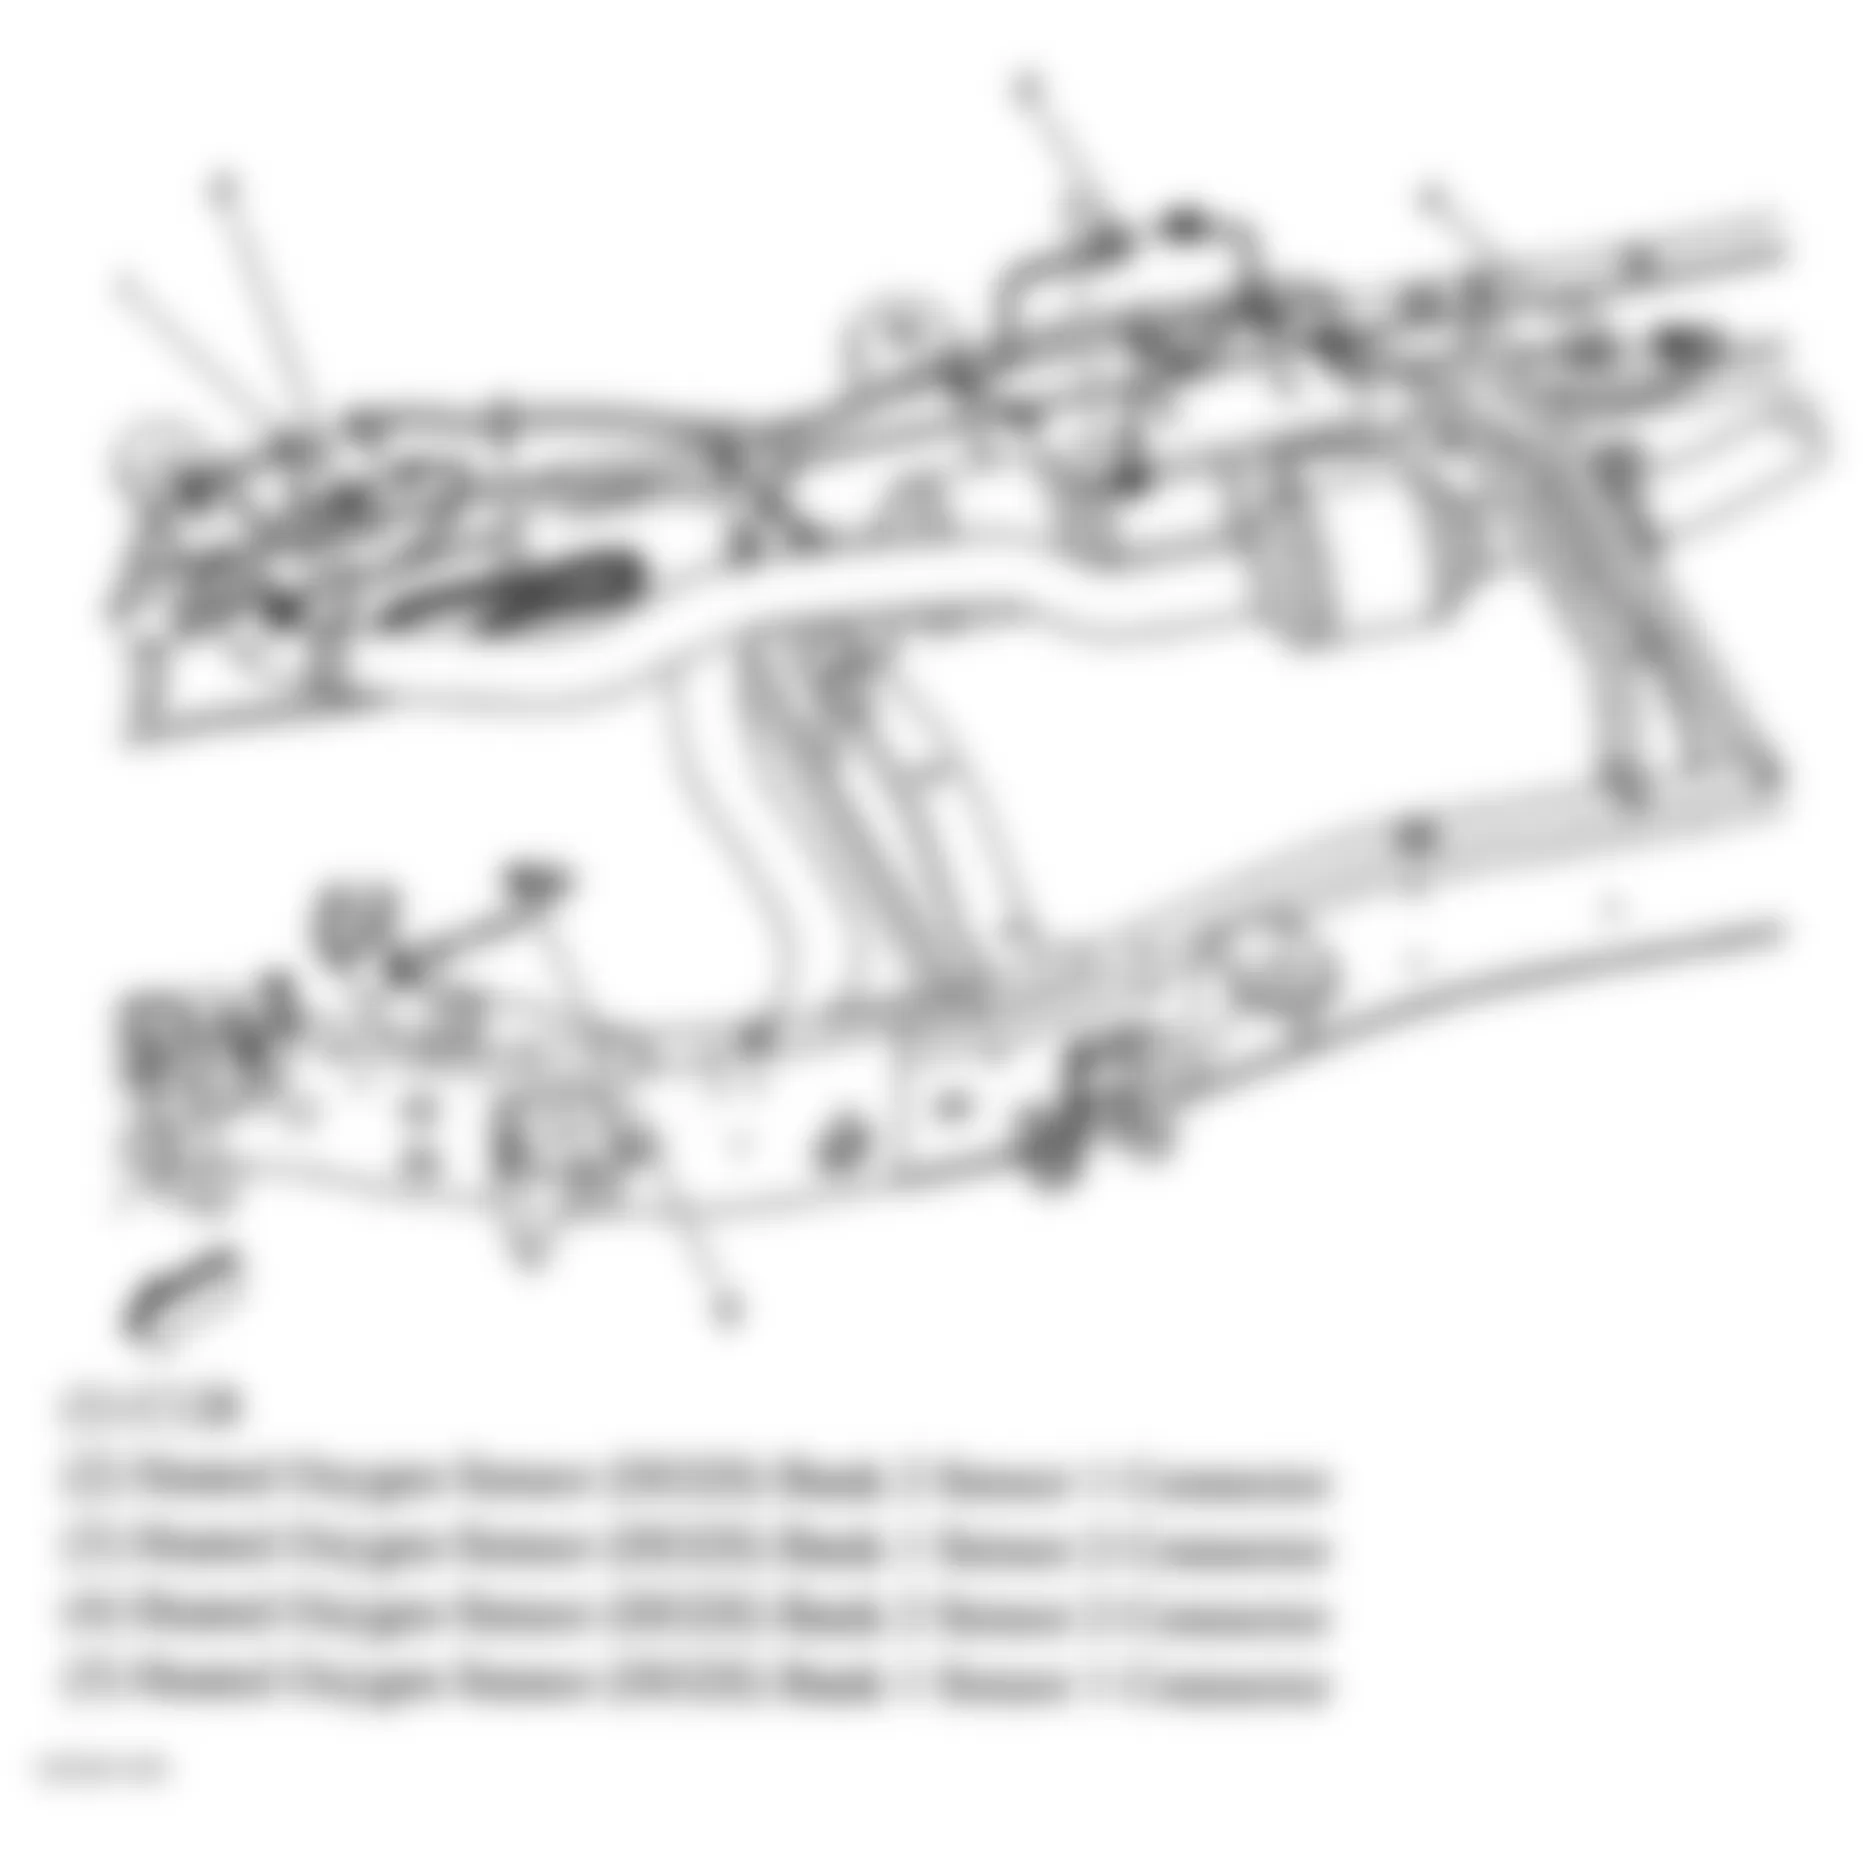 GMC Savana G3500 2006 - Component Locations -  Center Of Chassis